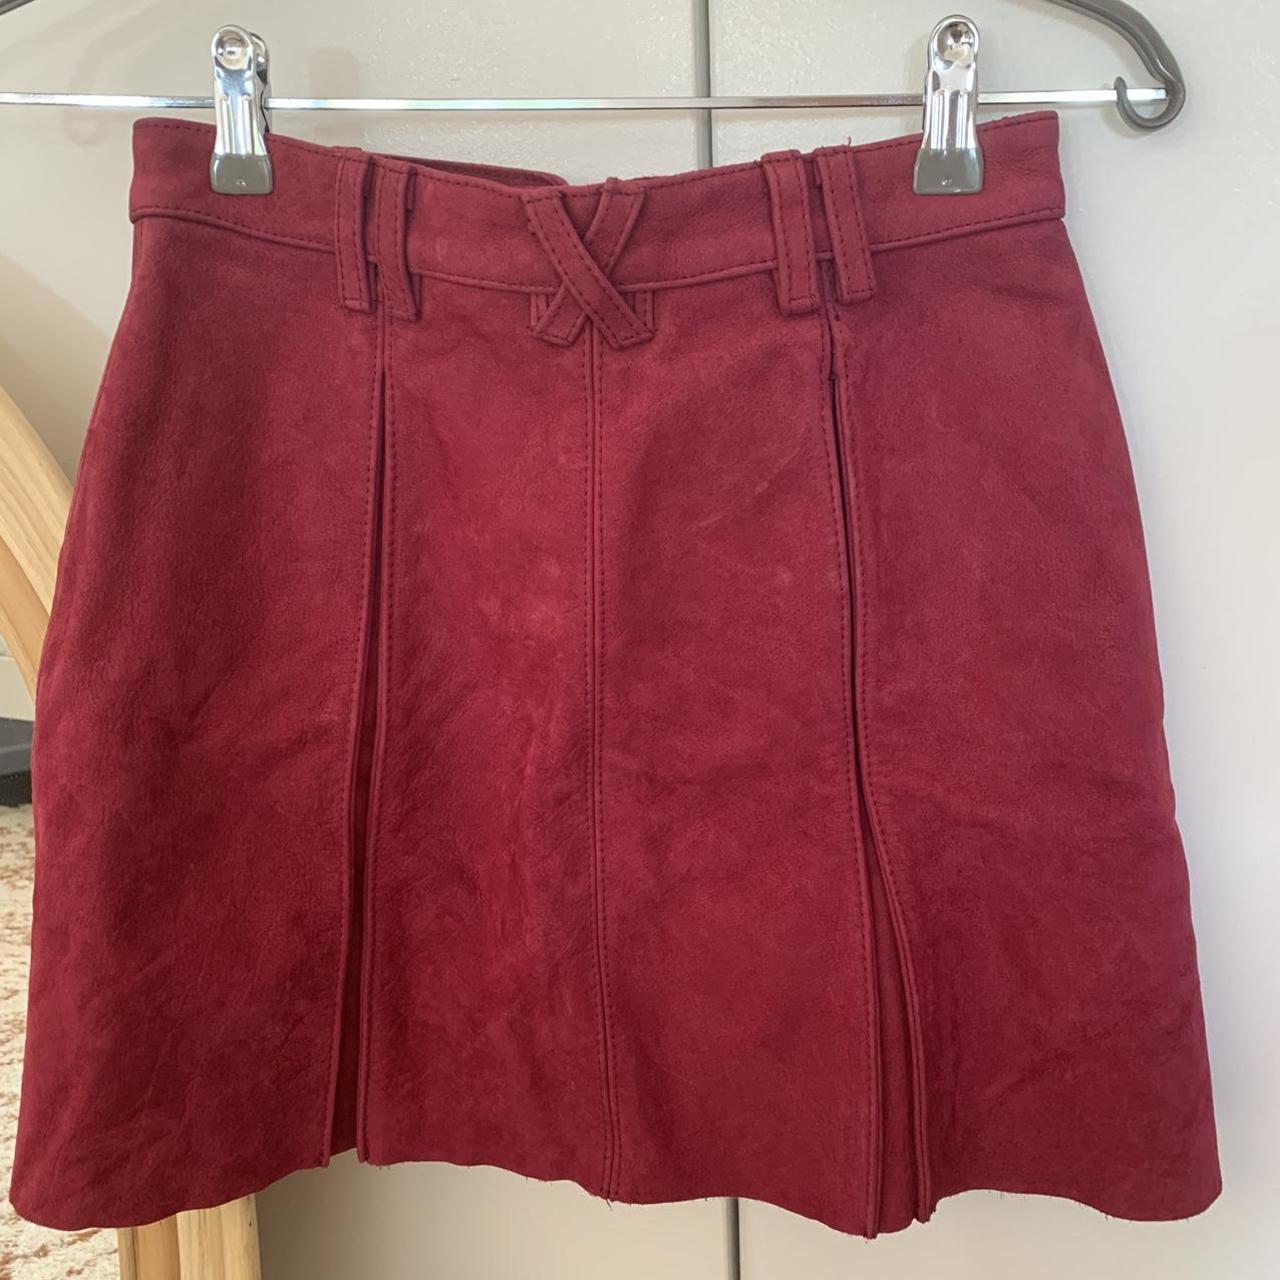 Aje leather skirt ( please note first photo is for... - Depop